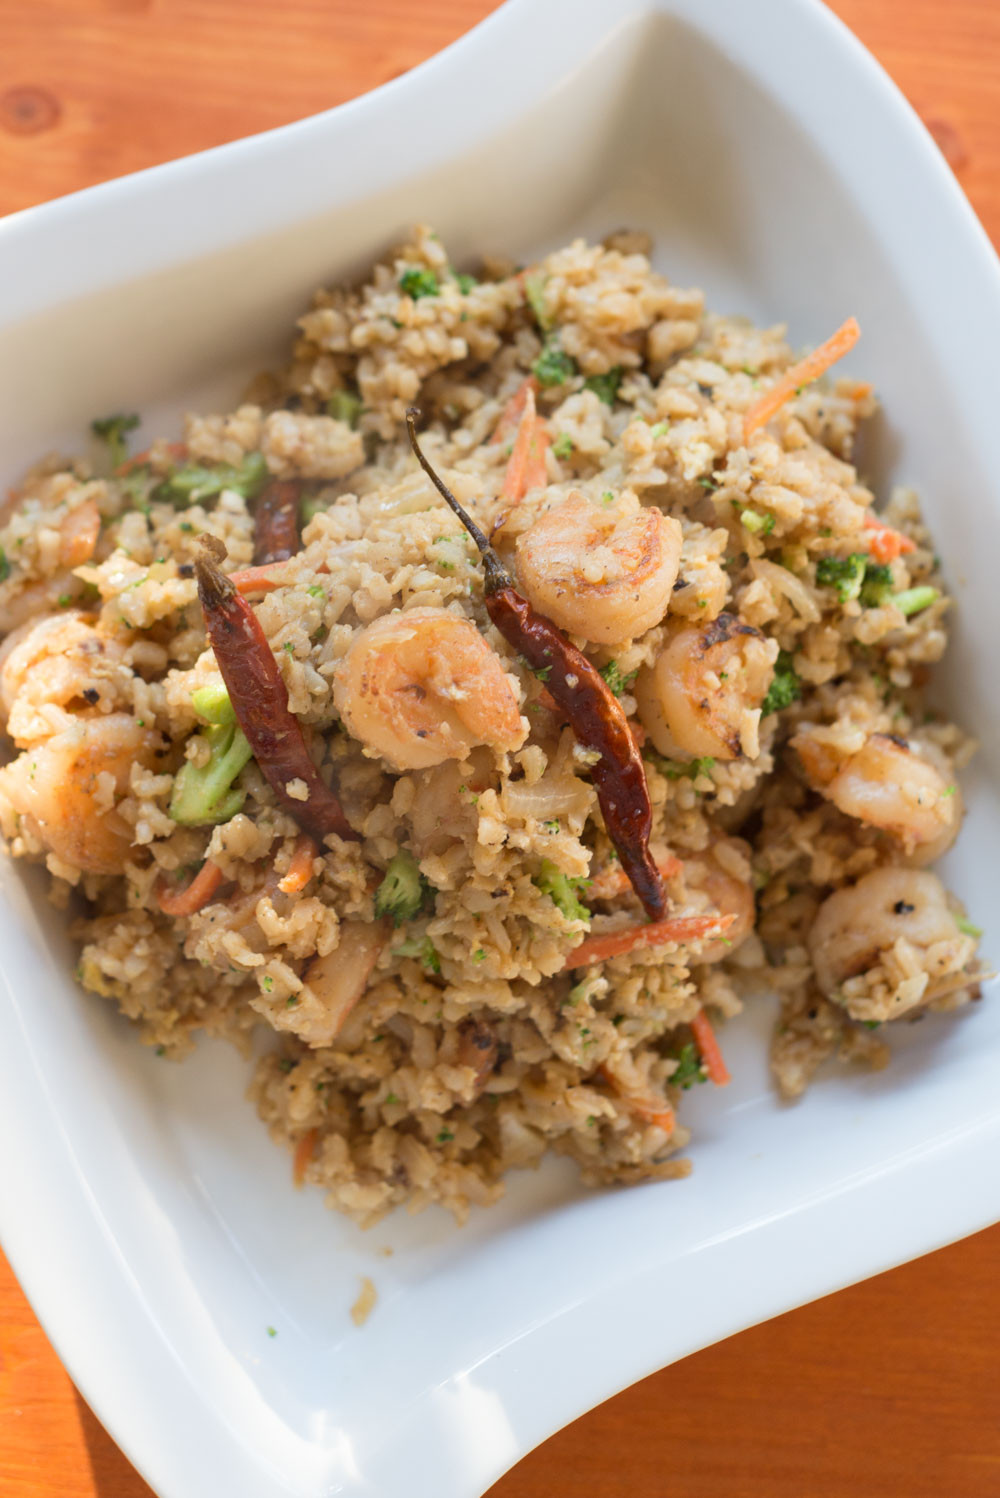 Shrimp Brown Rice Recipes
 Shrimp Fried Brown Rice Recipe Saved by the Kale